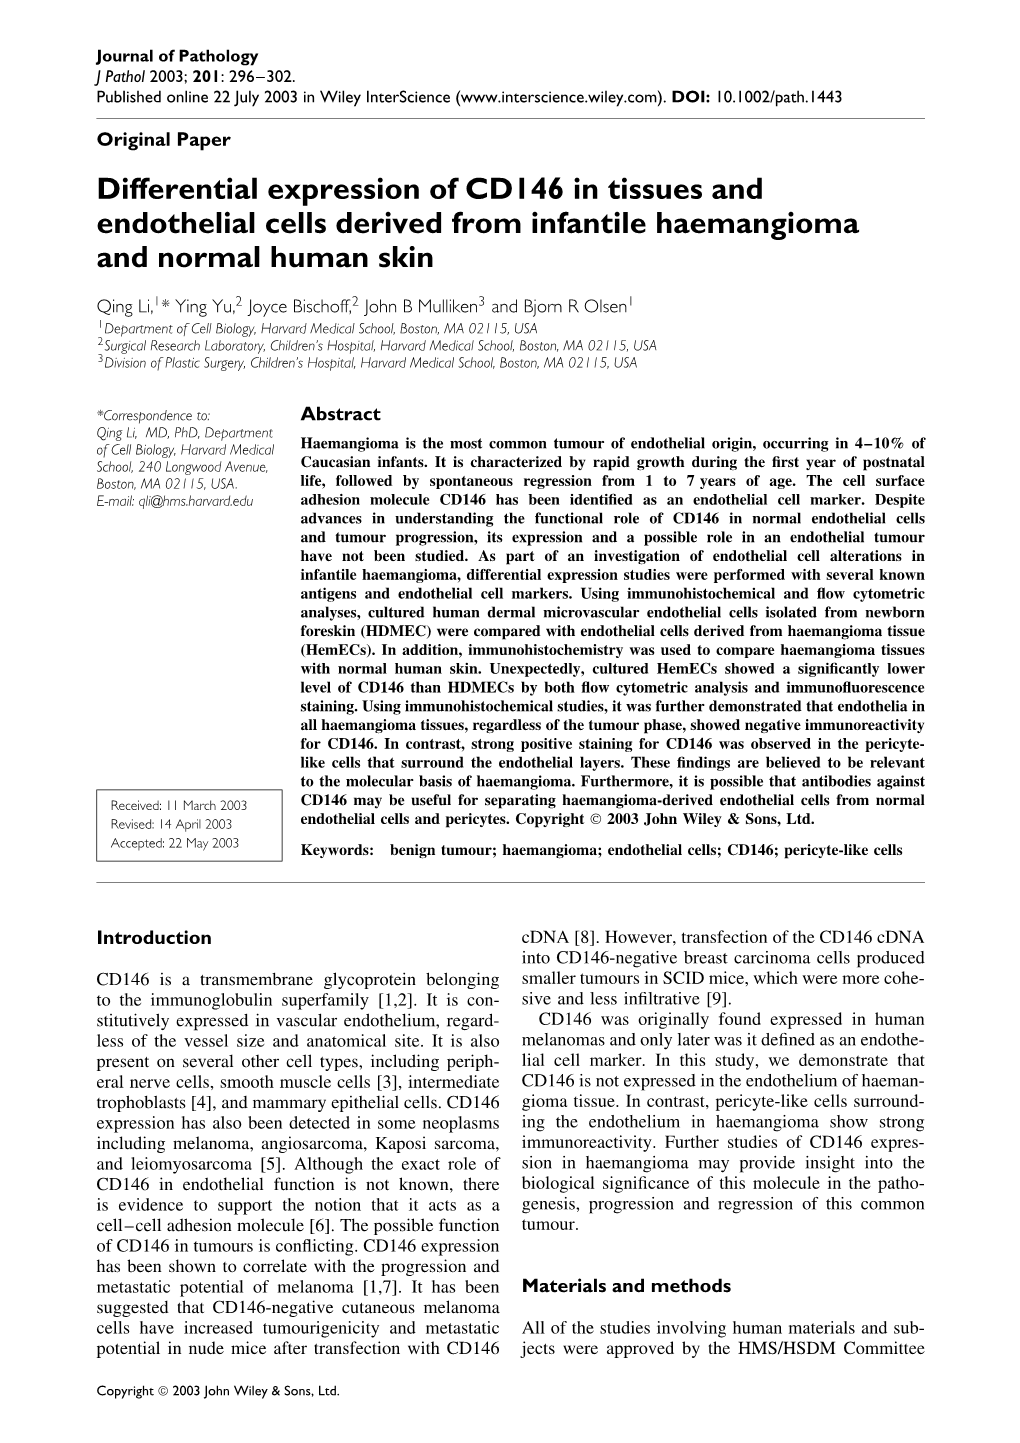 Differential Expression of CD146 in Tissues and Endothelial Cells Derived from Infantile Haemangioma and Normal Human Skin